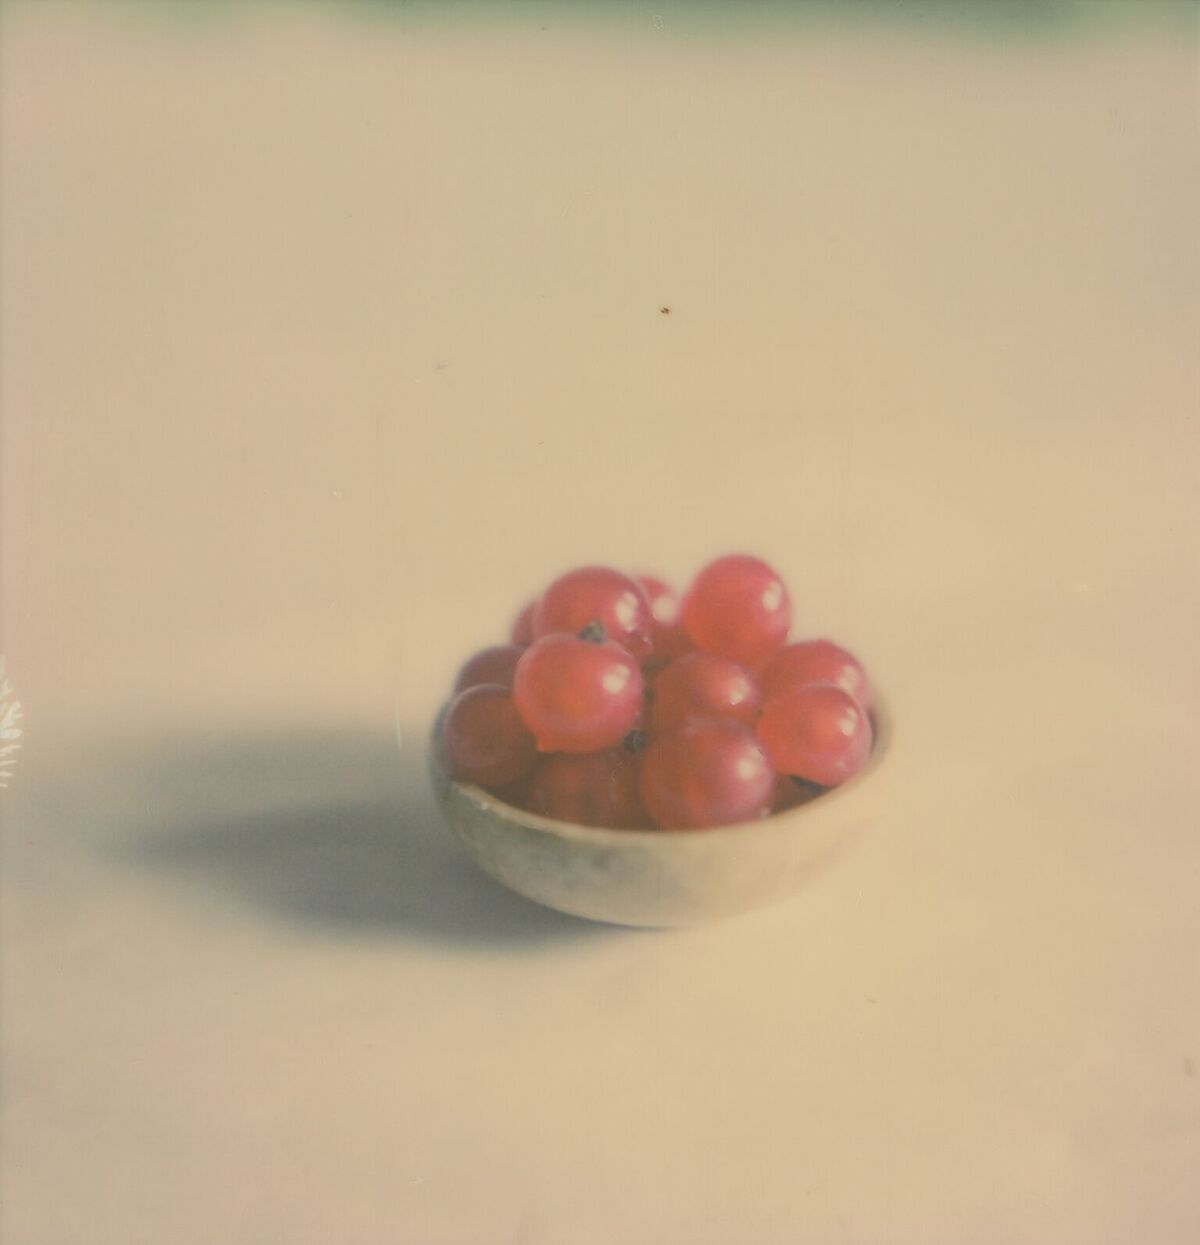 Red Currants | SX-70 Sonar | Impossible Project 600 | Anne Silver 